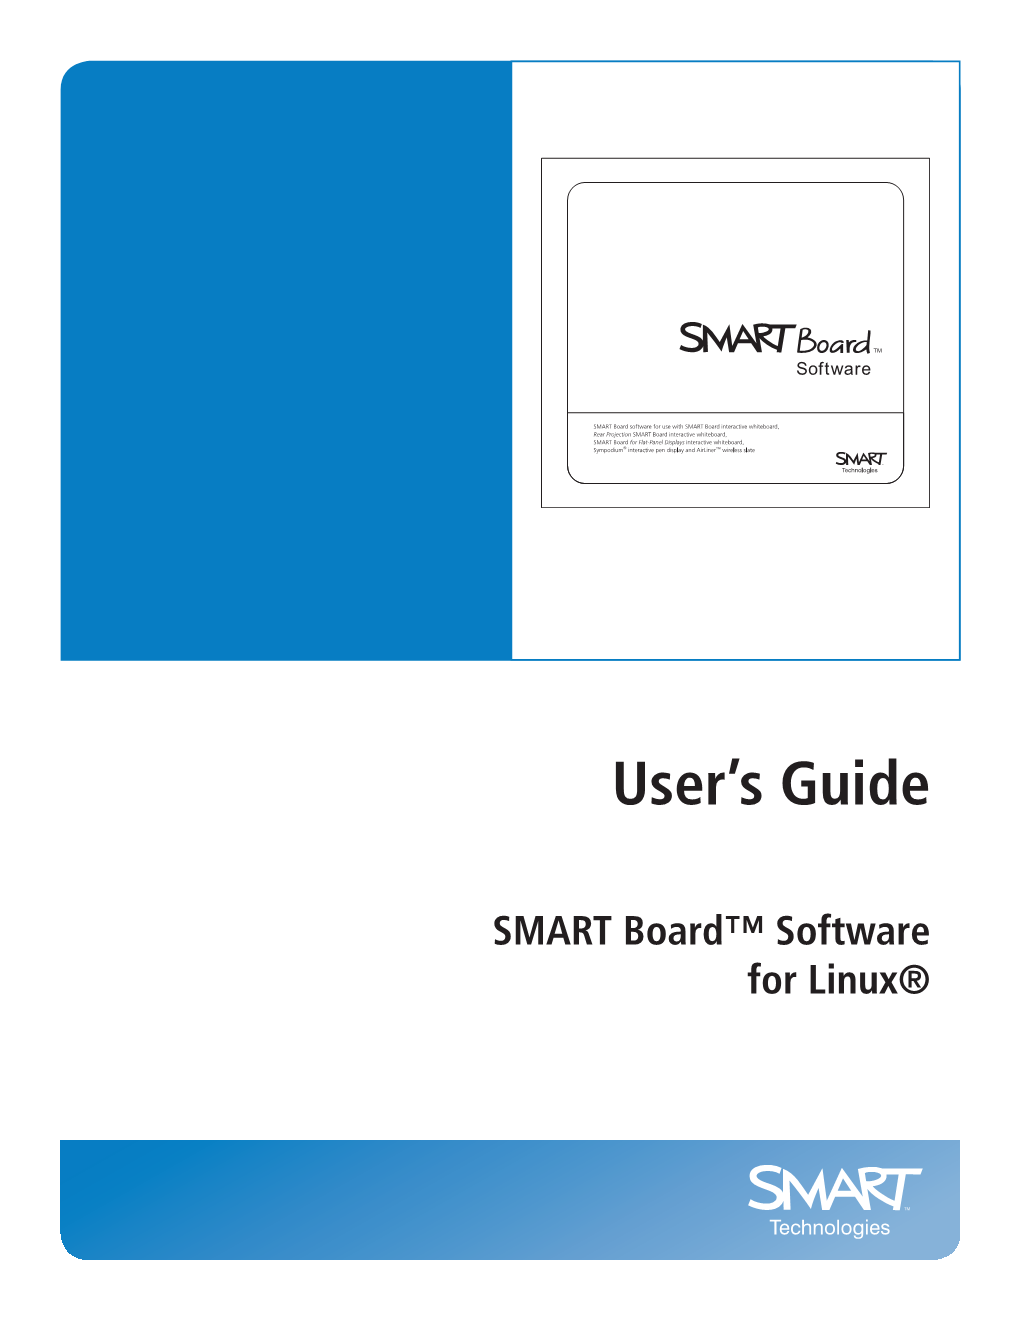 SMART Board Software for Linux User's Guide